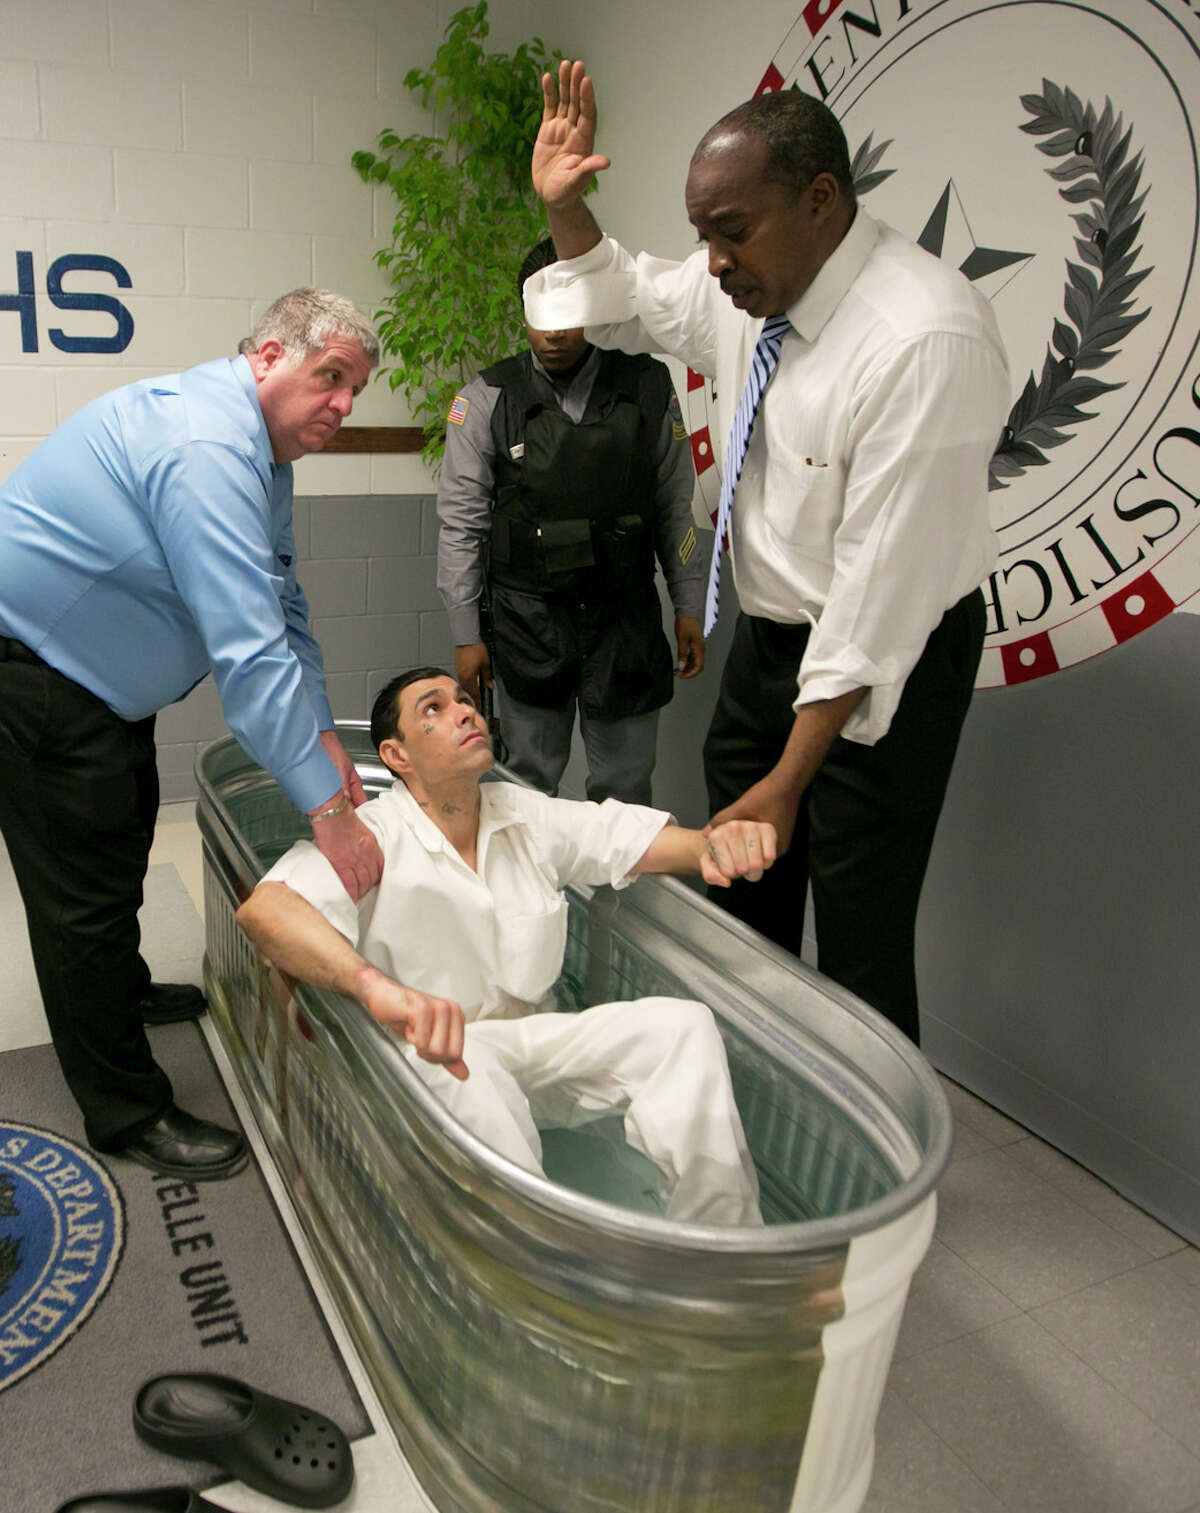 One of three prison inmates is baptized Friday at the Texas Department of Criminal Justice's Estelle High-Security Unit in Huntsville.